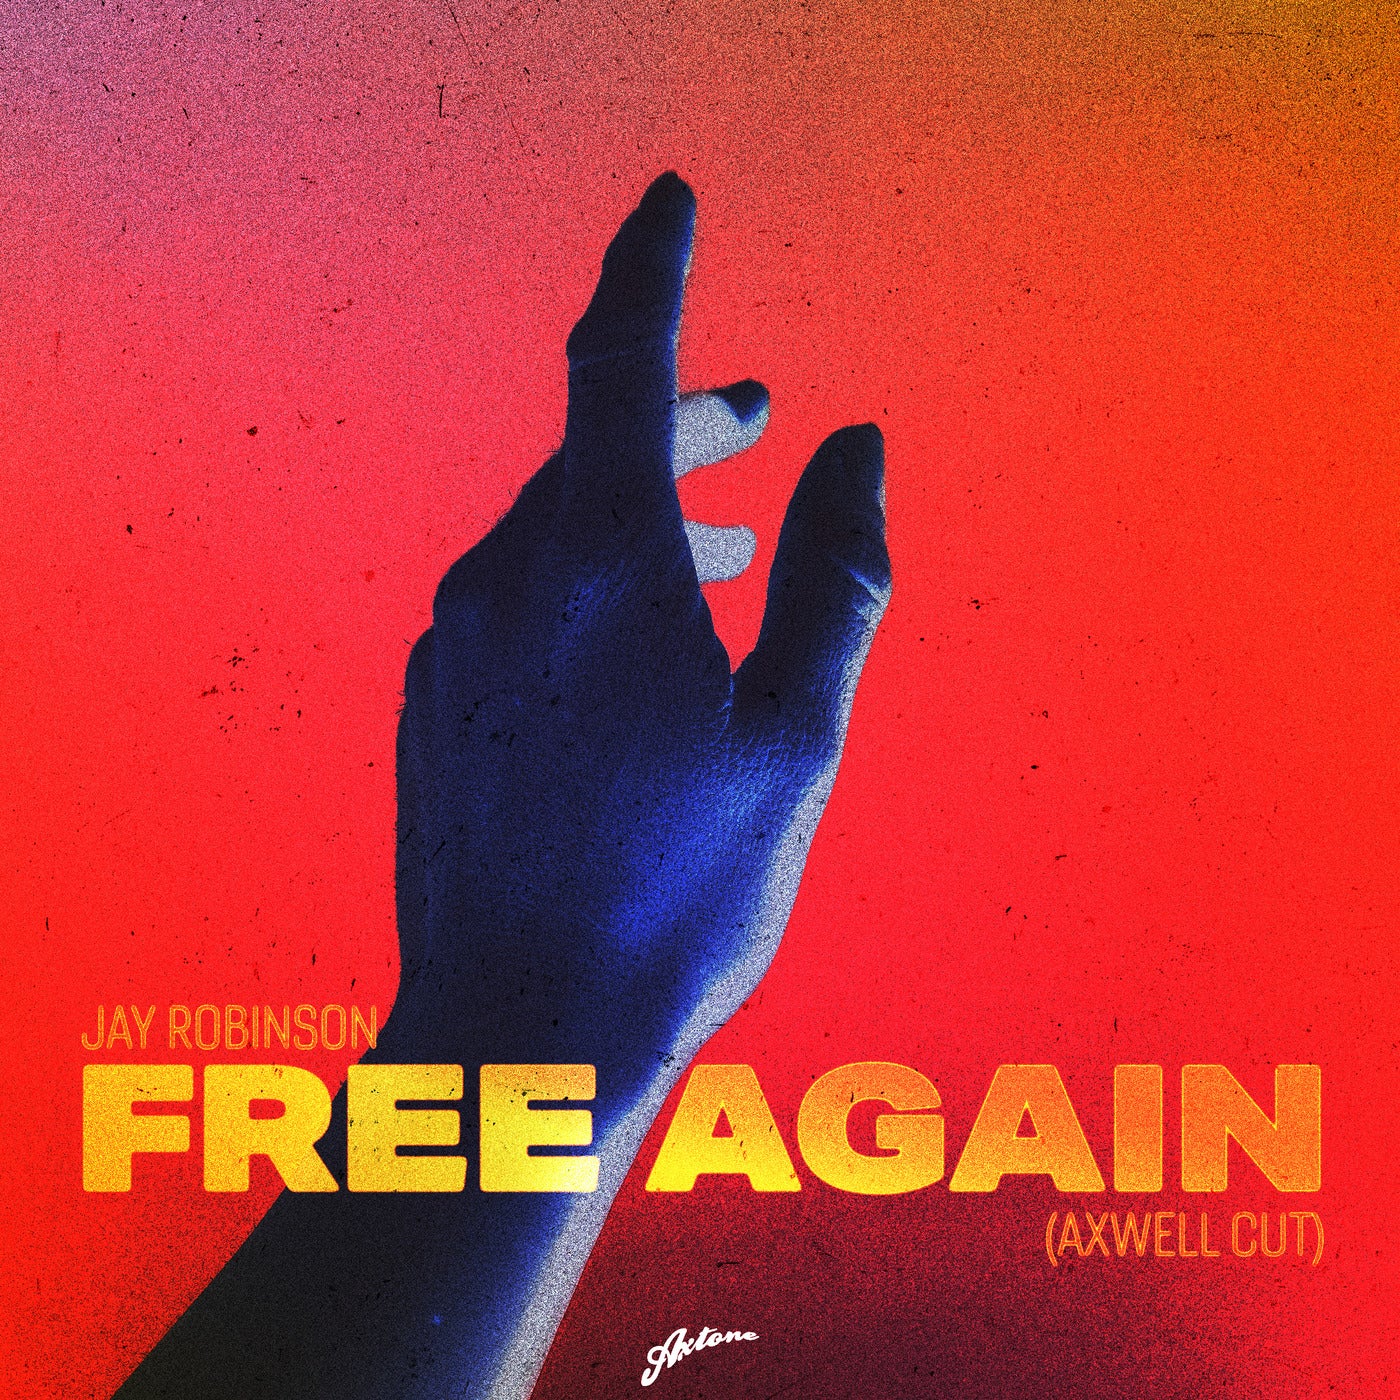 Download Axwell, Jay Robinson - Free Again - Axwell Cut on Electrobuzz